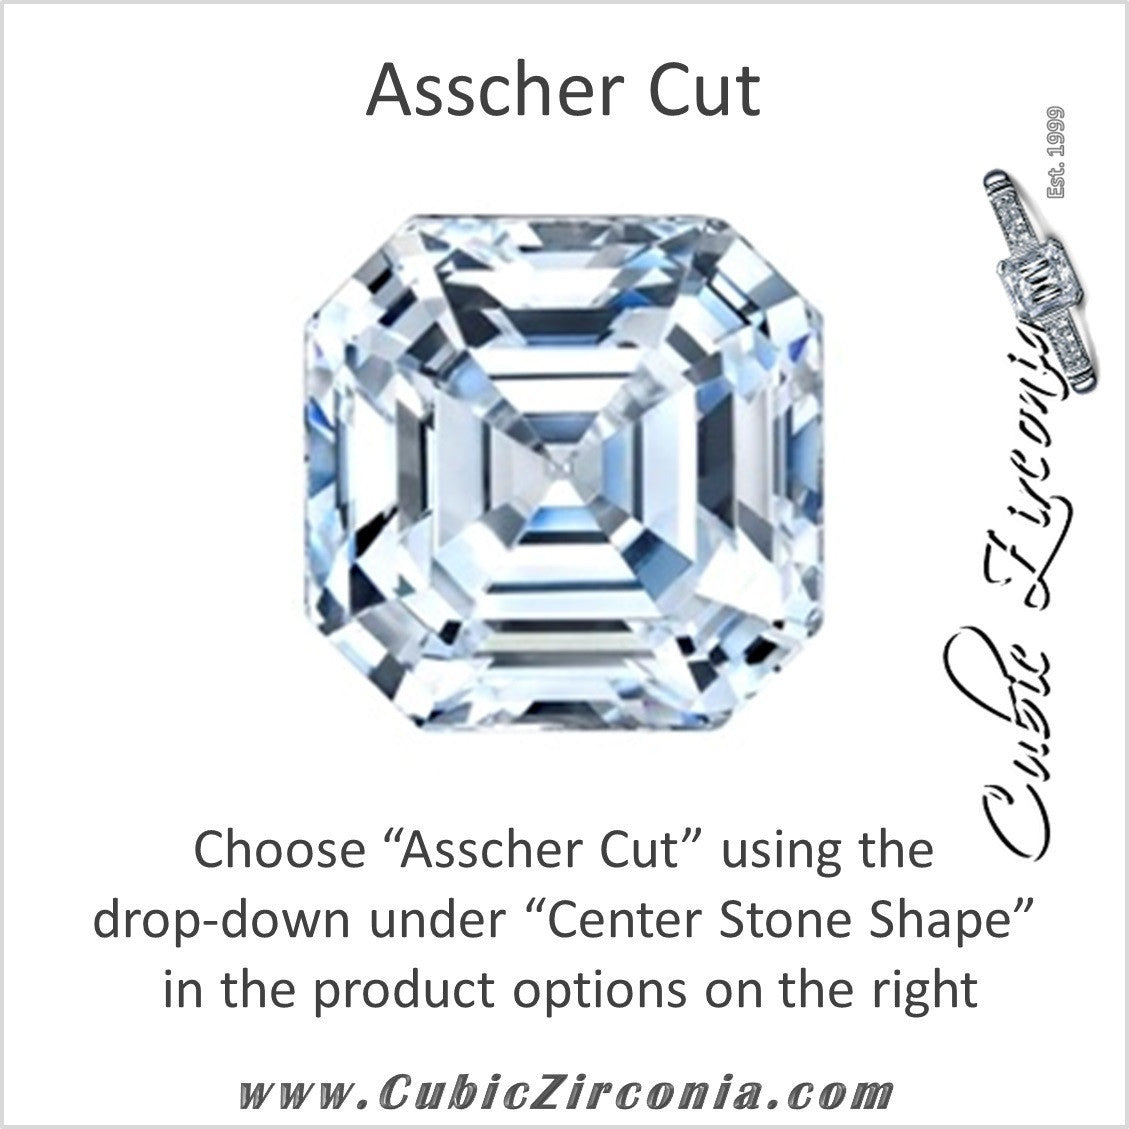 Cubic Zirconia Engagement Ring- The Lashay (Round or Asscher 4-Prong Tulipset® Solitaire Ring)